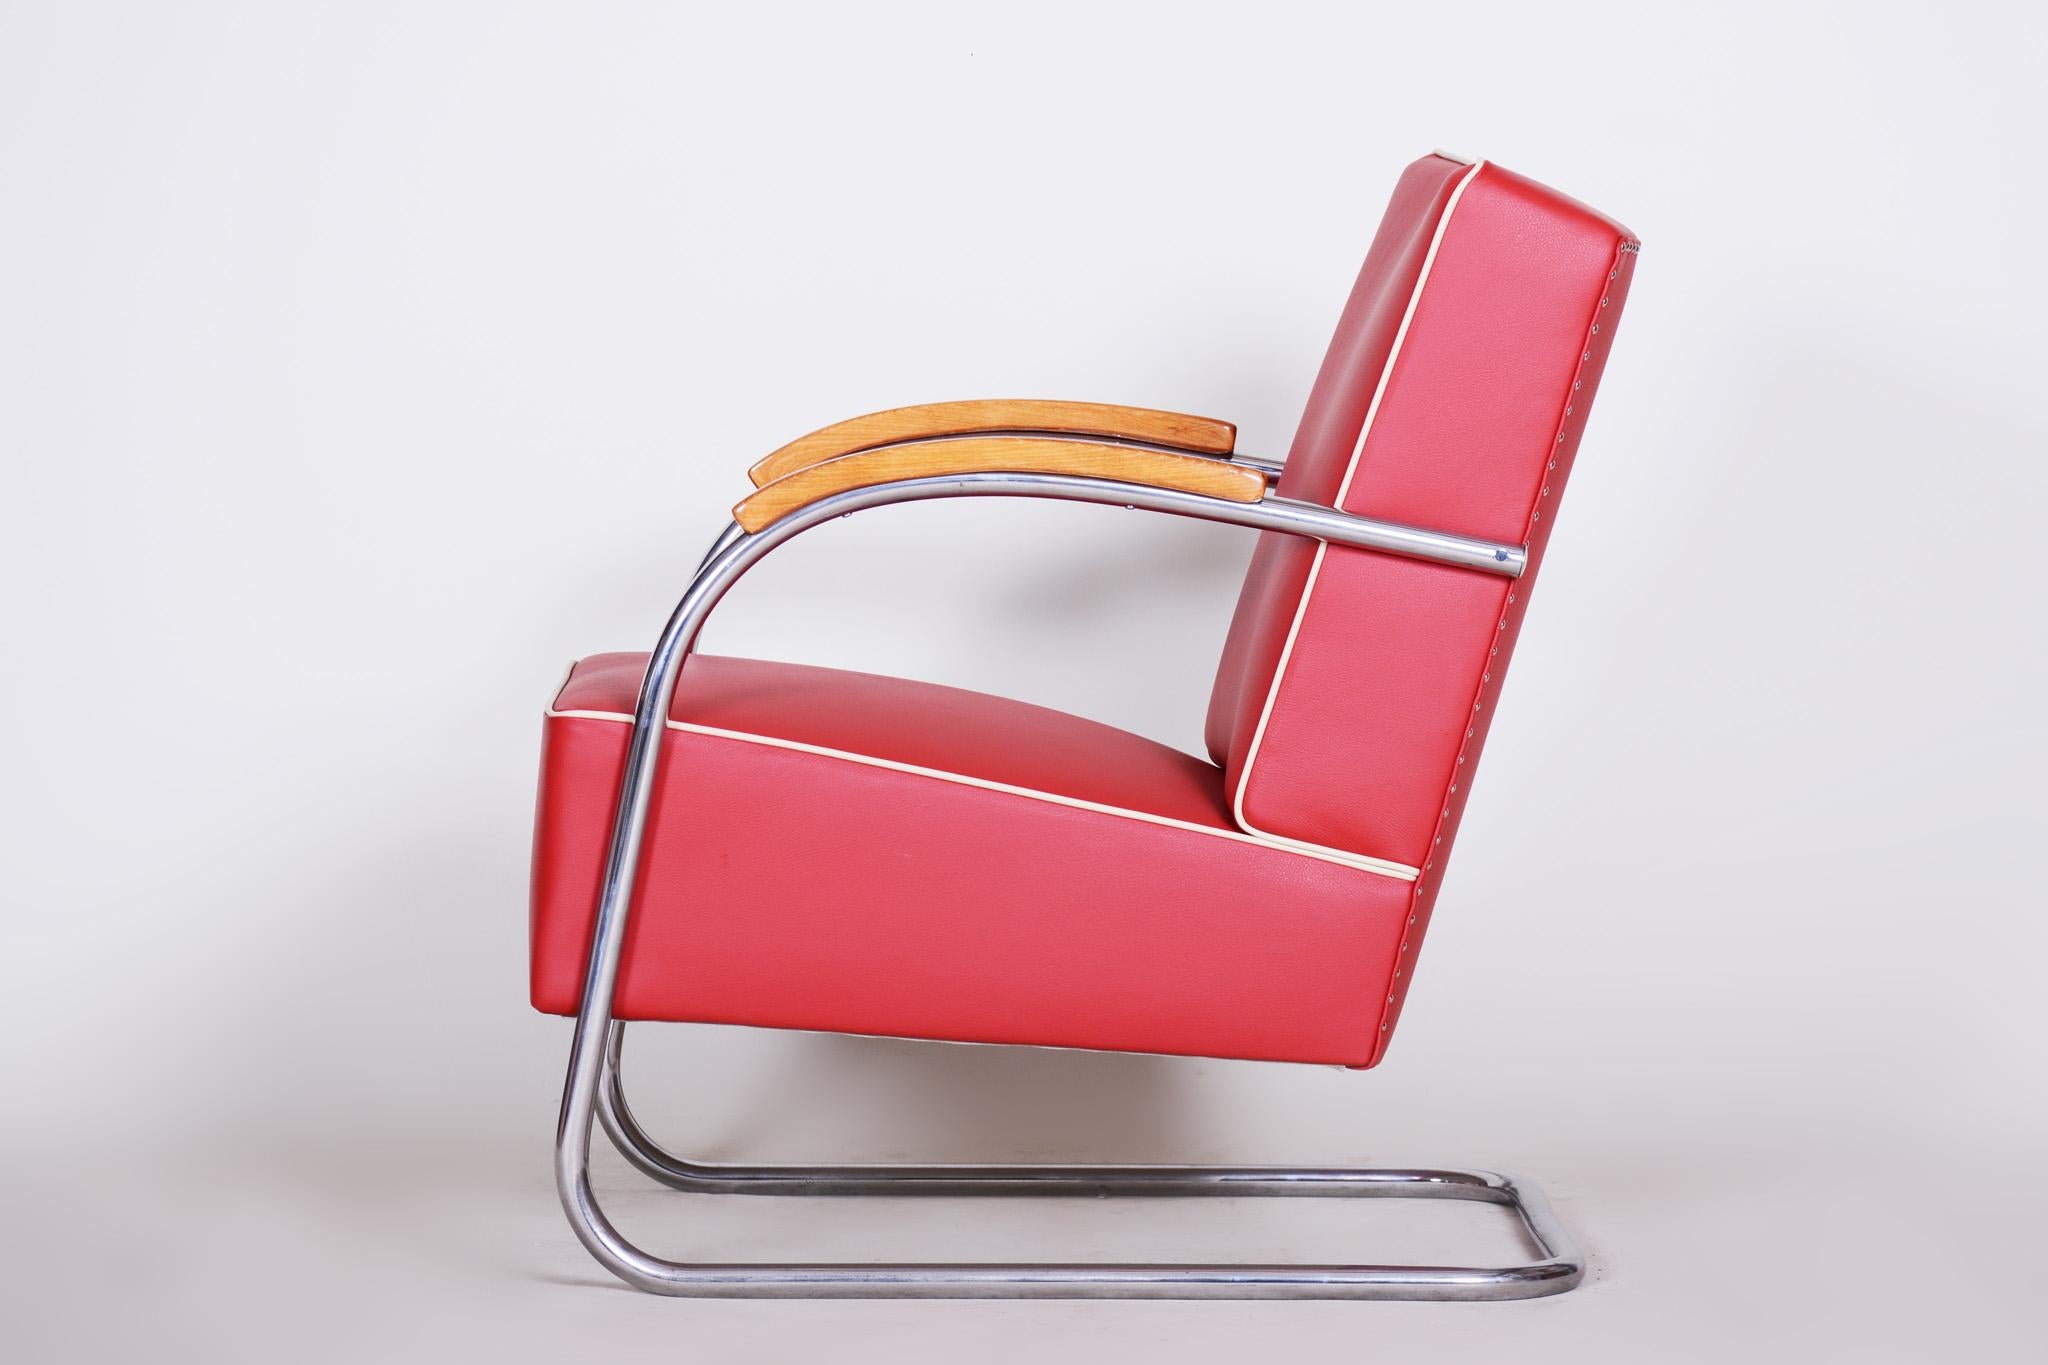 Red Tubular Steel Cantilever Chrome Armchair, High Quality Leather, 1930s For Sale 1